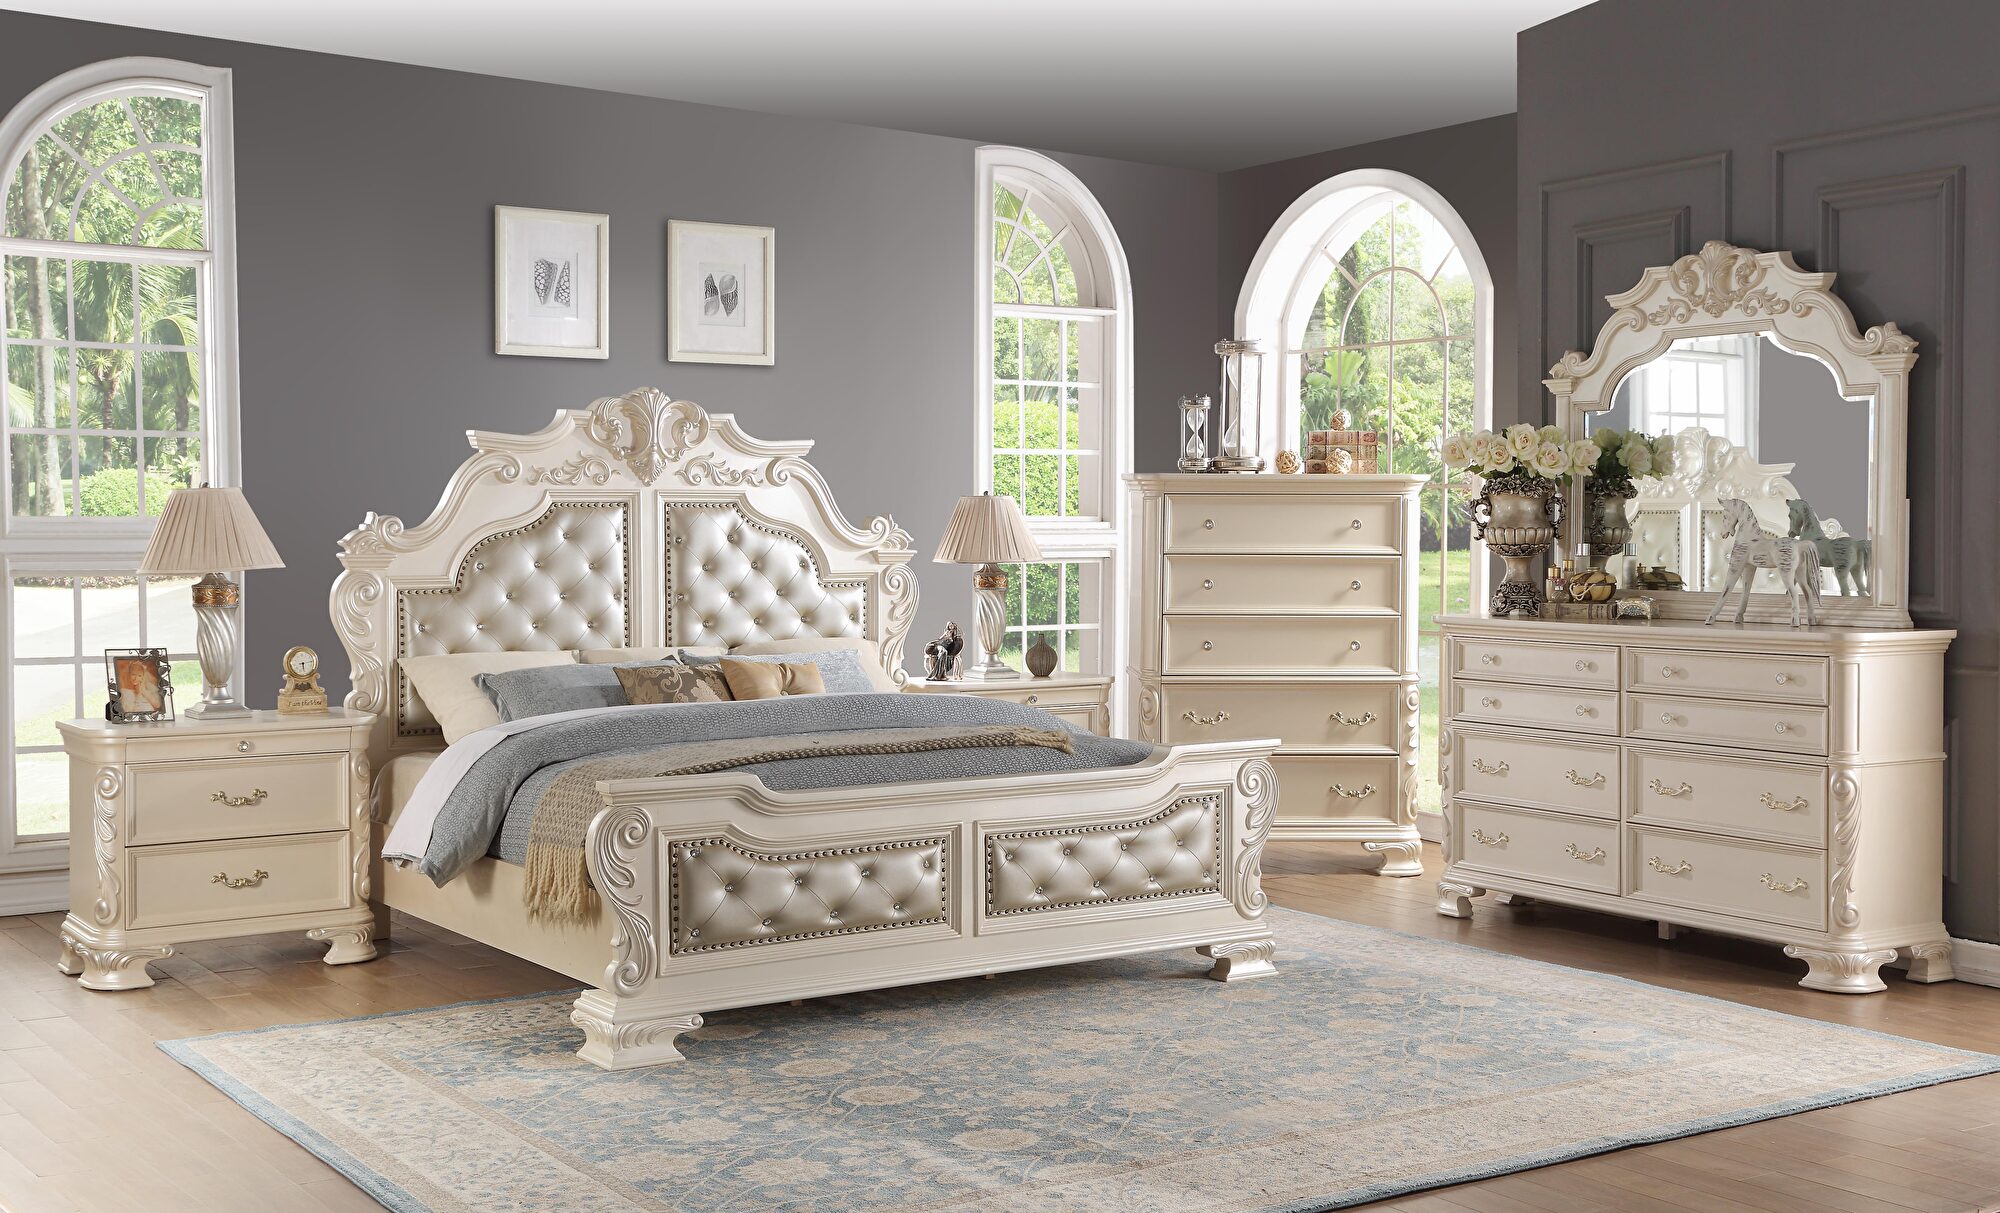 Victoria King Size Bed Cosmos Furniture, Victorian Bed King